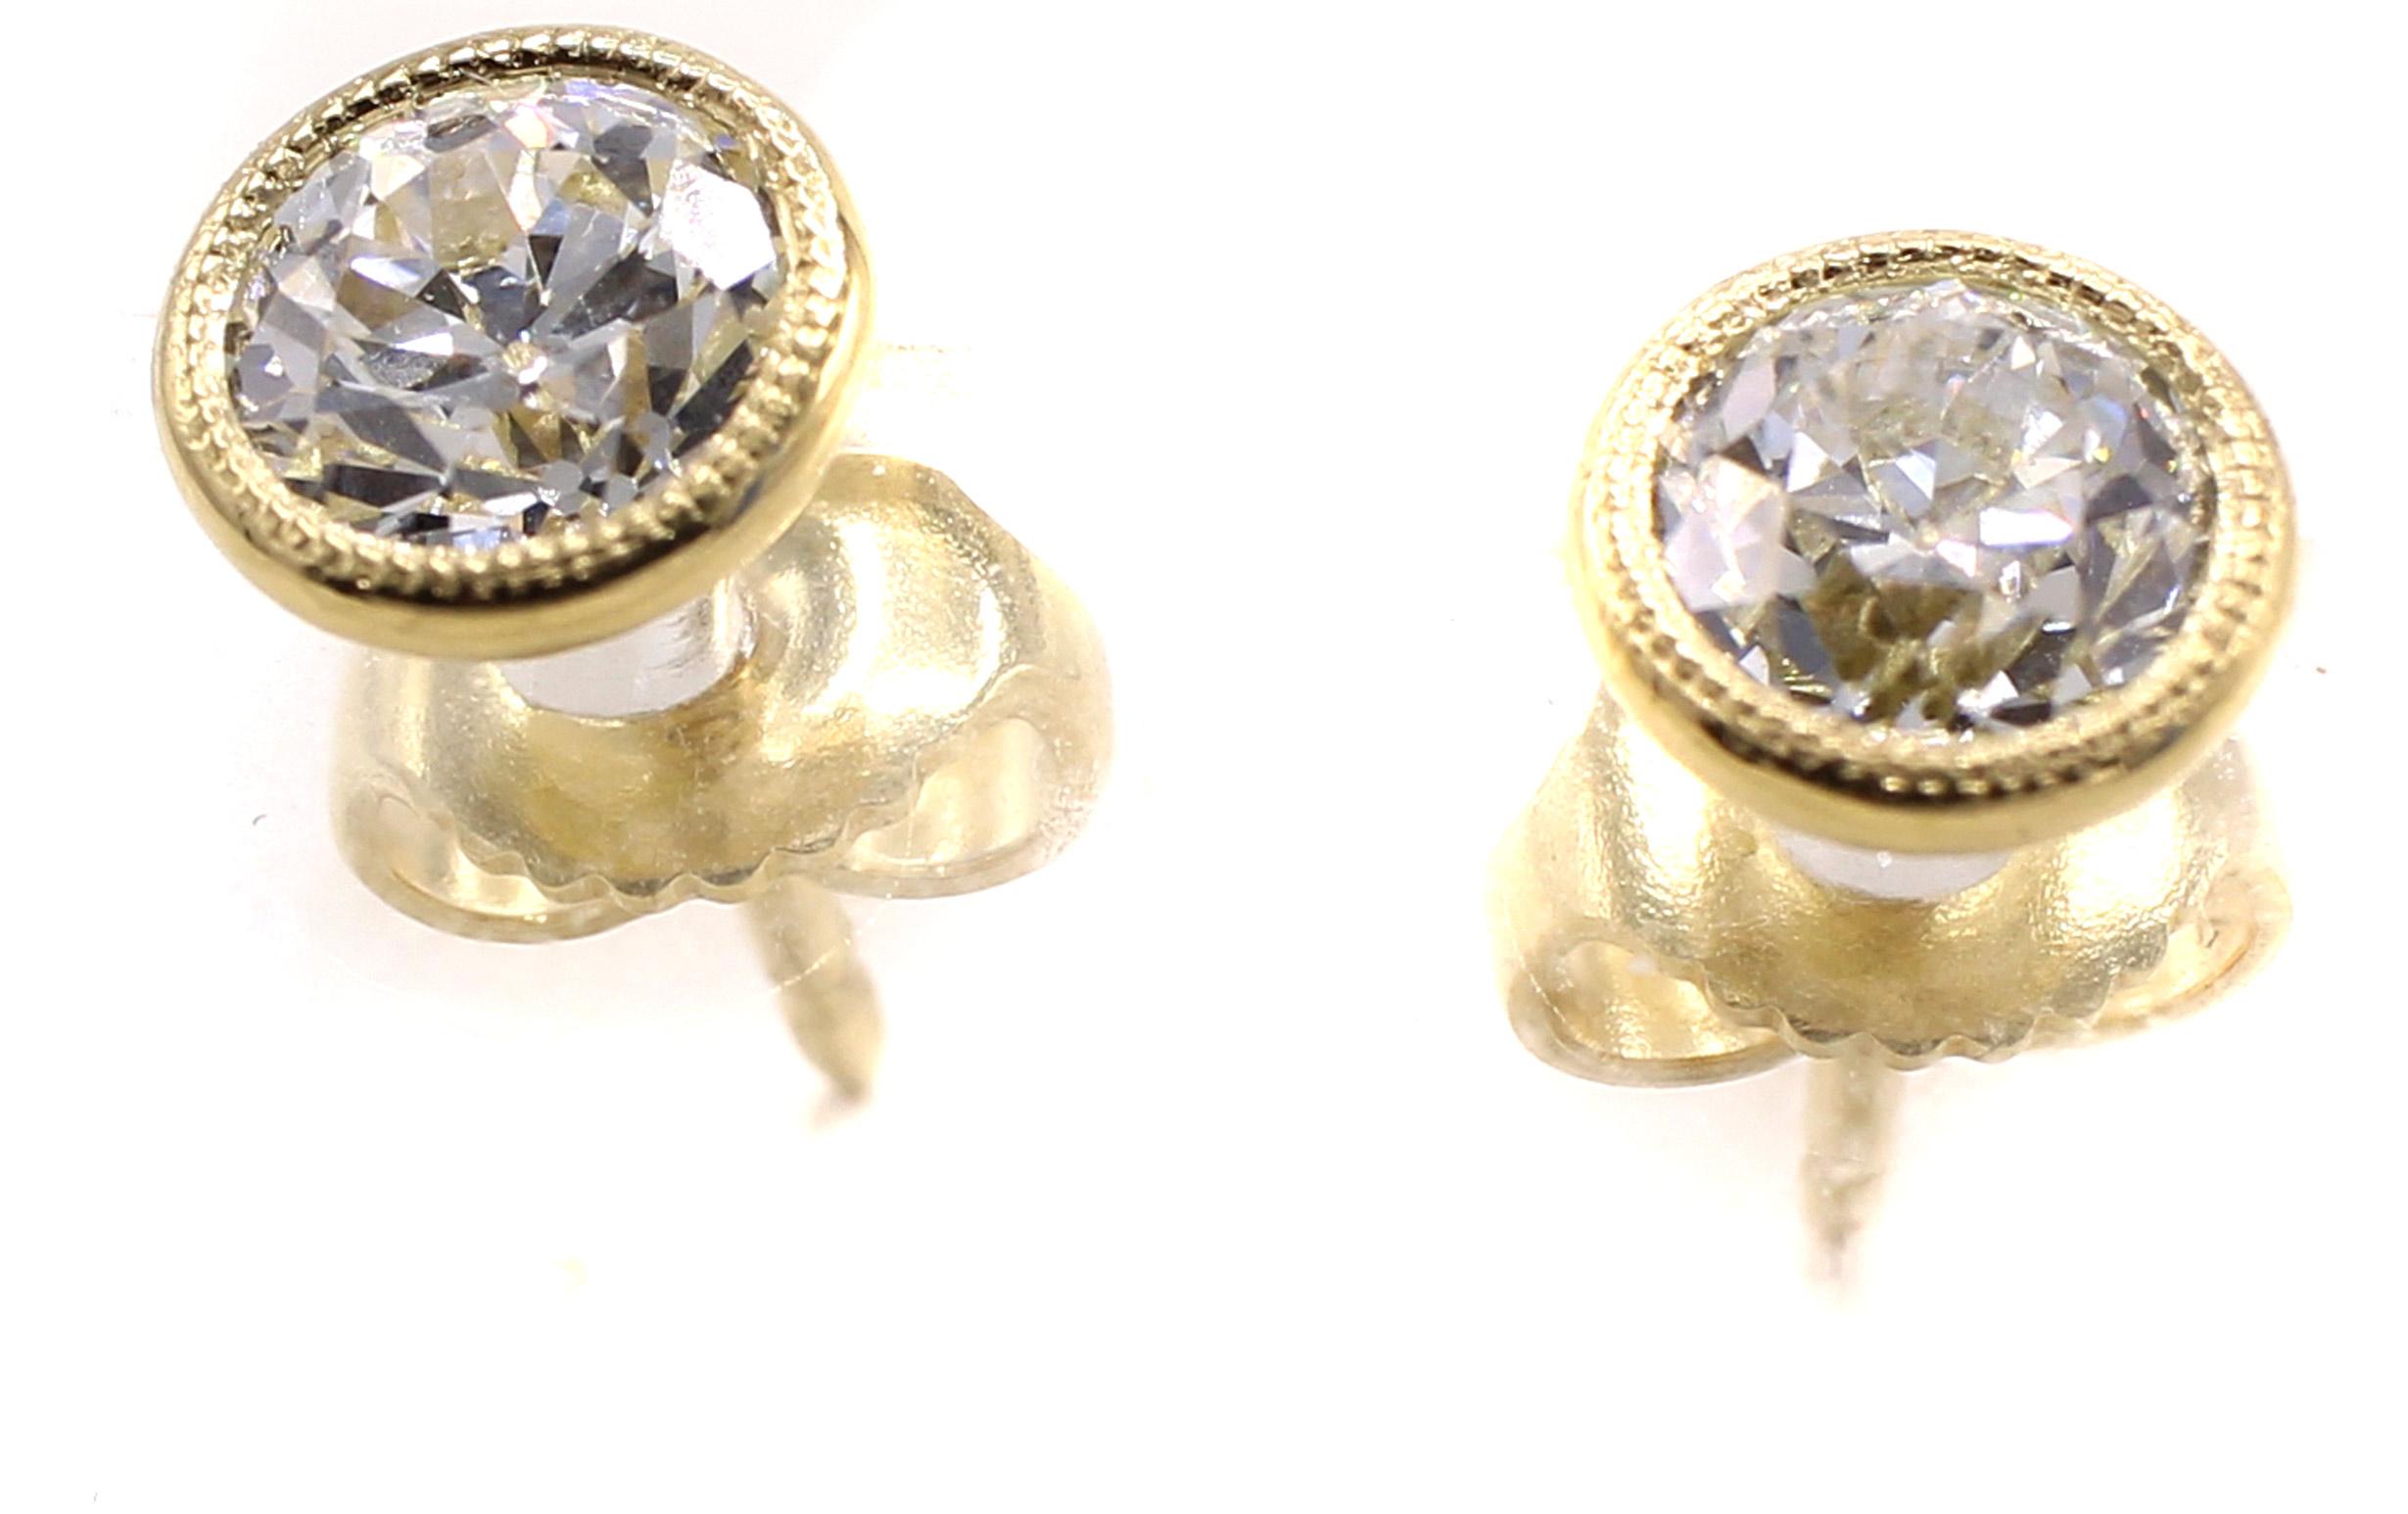 Two charming Old European Cut diamonds with a total weight of 1.41 carats have been set into these handcrafted 18 karat white gold bezel set mountings. The tops of the bezels have fine milligrain work combining the new world with the old cuts from a